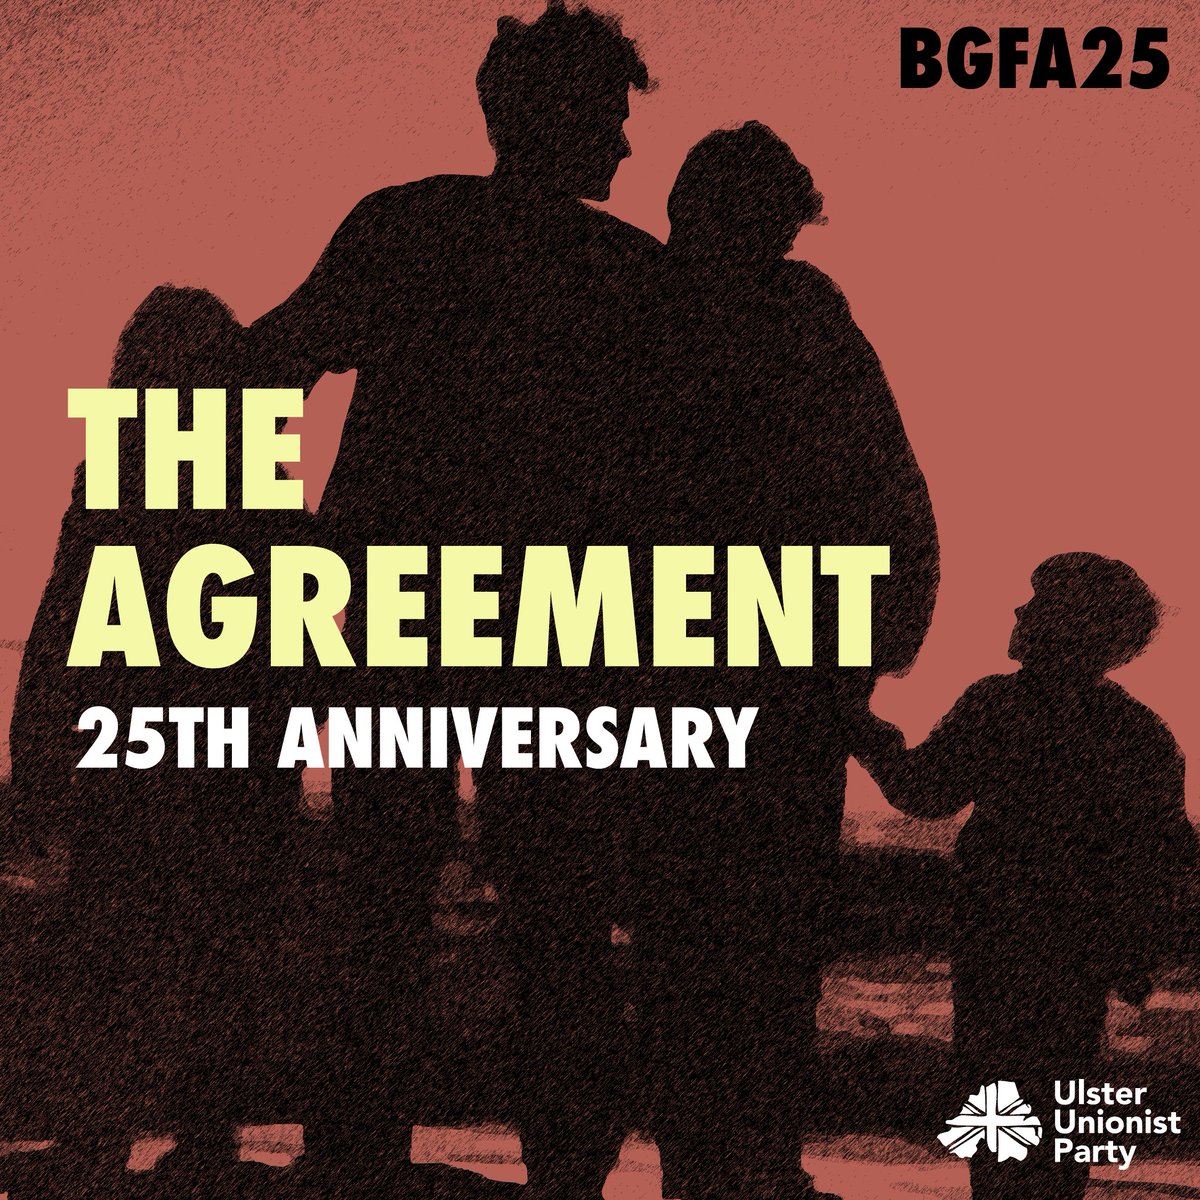 We’re in Dublin today for our first event marking the 25th Anniversary of the Belfast Good Friday Agreement. 

Former Taoiseach Bertie Ahern will be the keynote speaker reflecting on Strand 2 and the legacy of the Agreement. 

#BGFA25